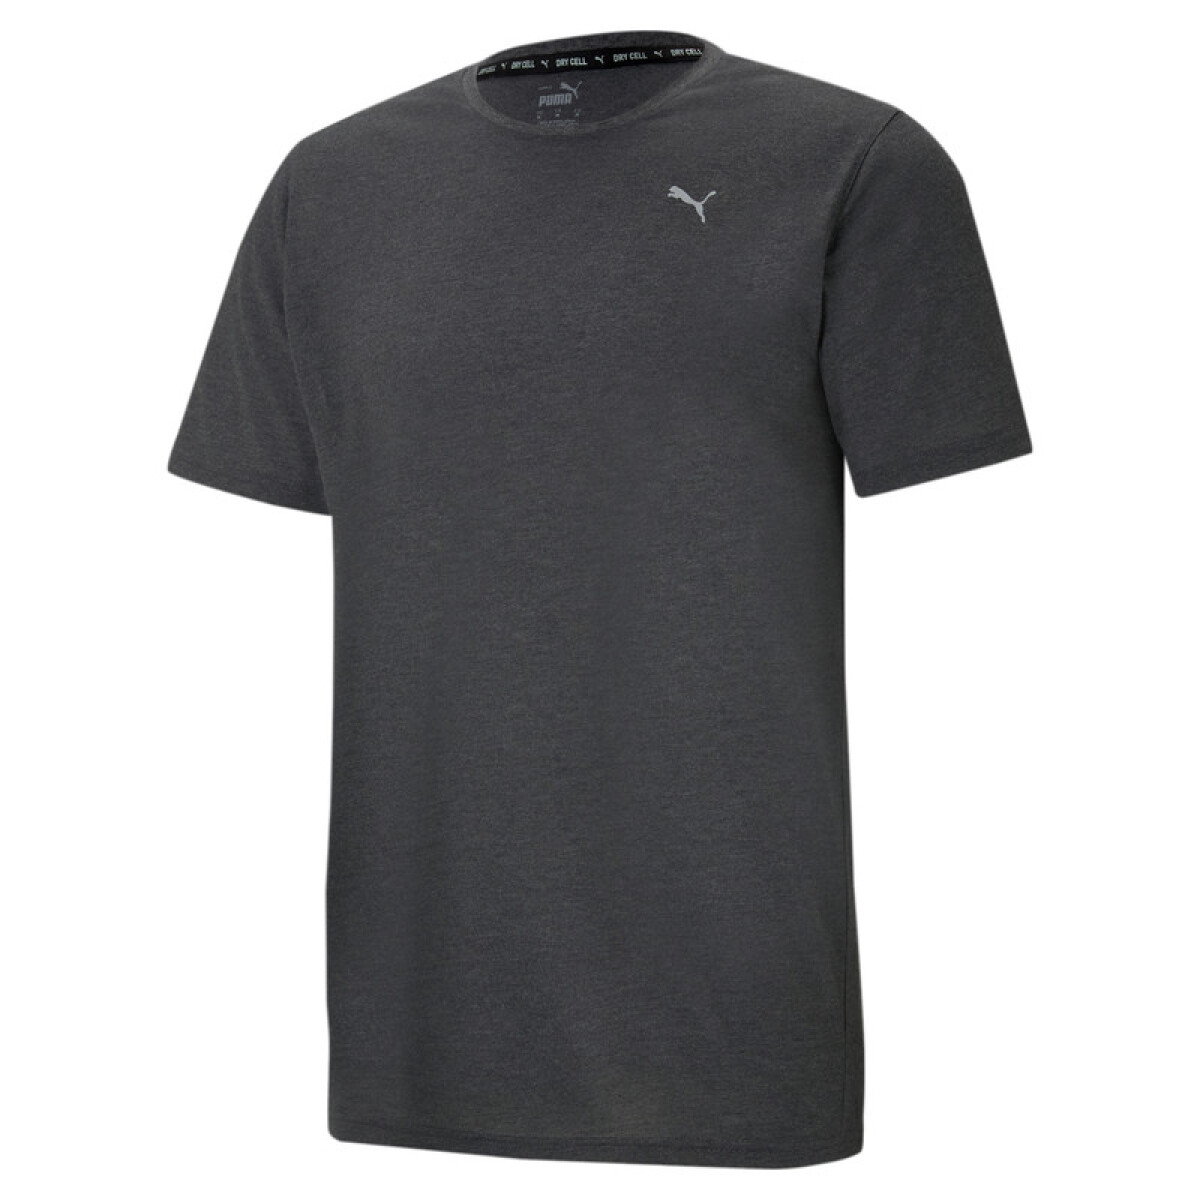 PERFORMANCE HEATHER TEE M 52031607 - Gris Oscuro 